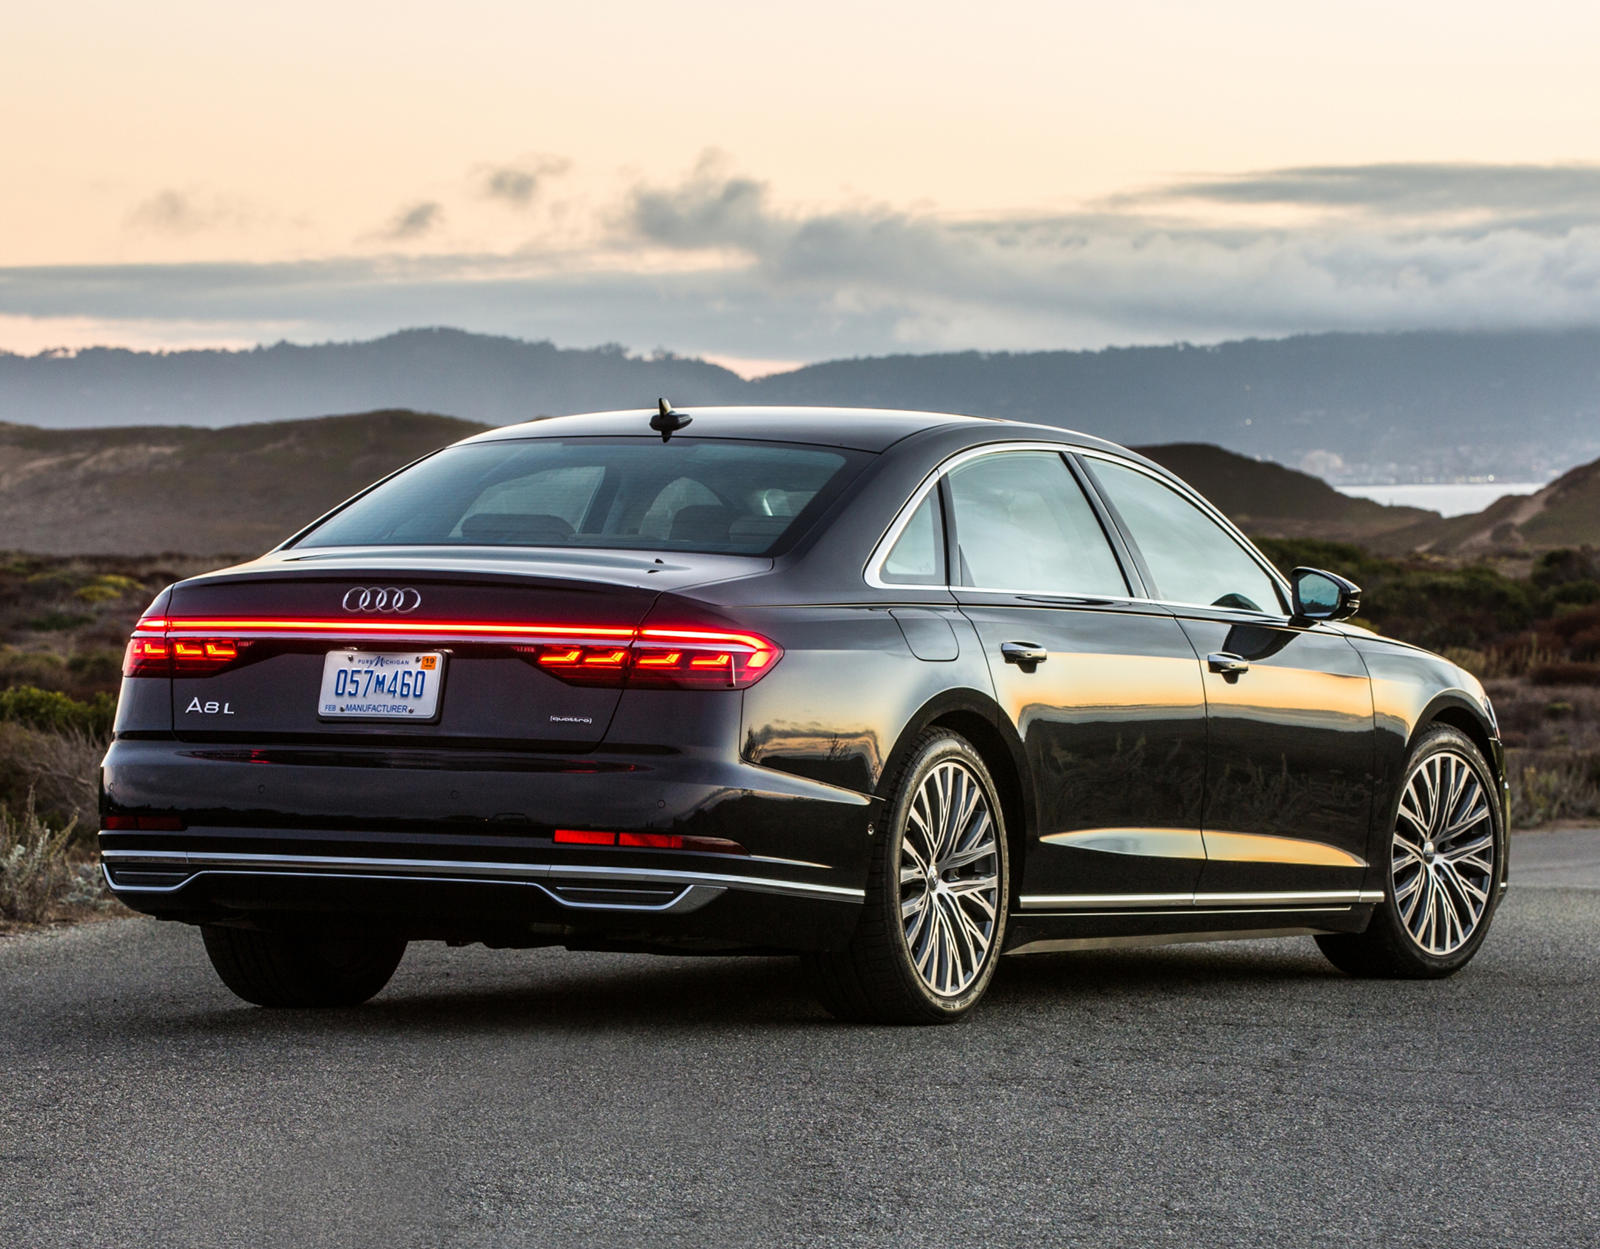 meet-the-audi-a8-l-security-the-ultimate-armored-luxury-sedan-carbuzz